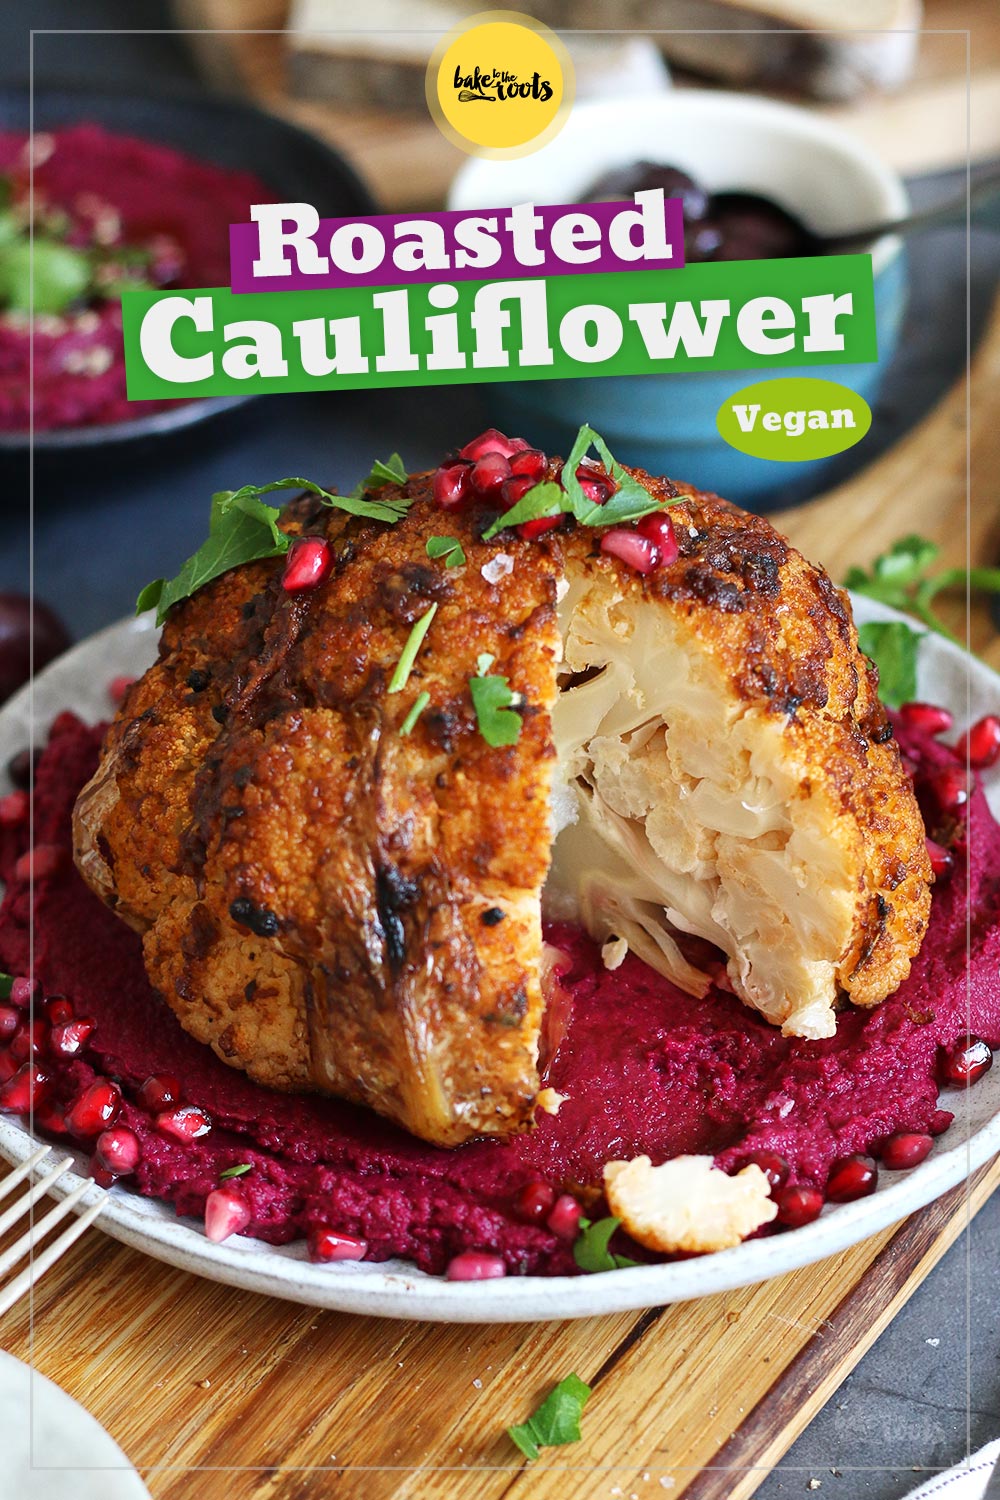 Harissa Roasted Cauliflower with Red Beet Hummus | Bake to the roots